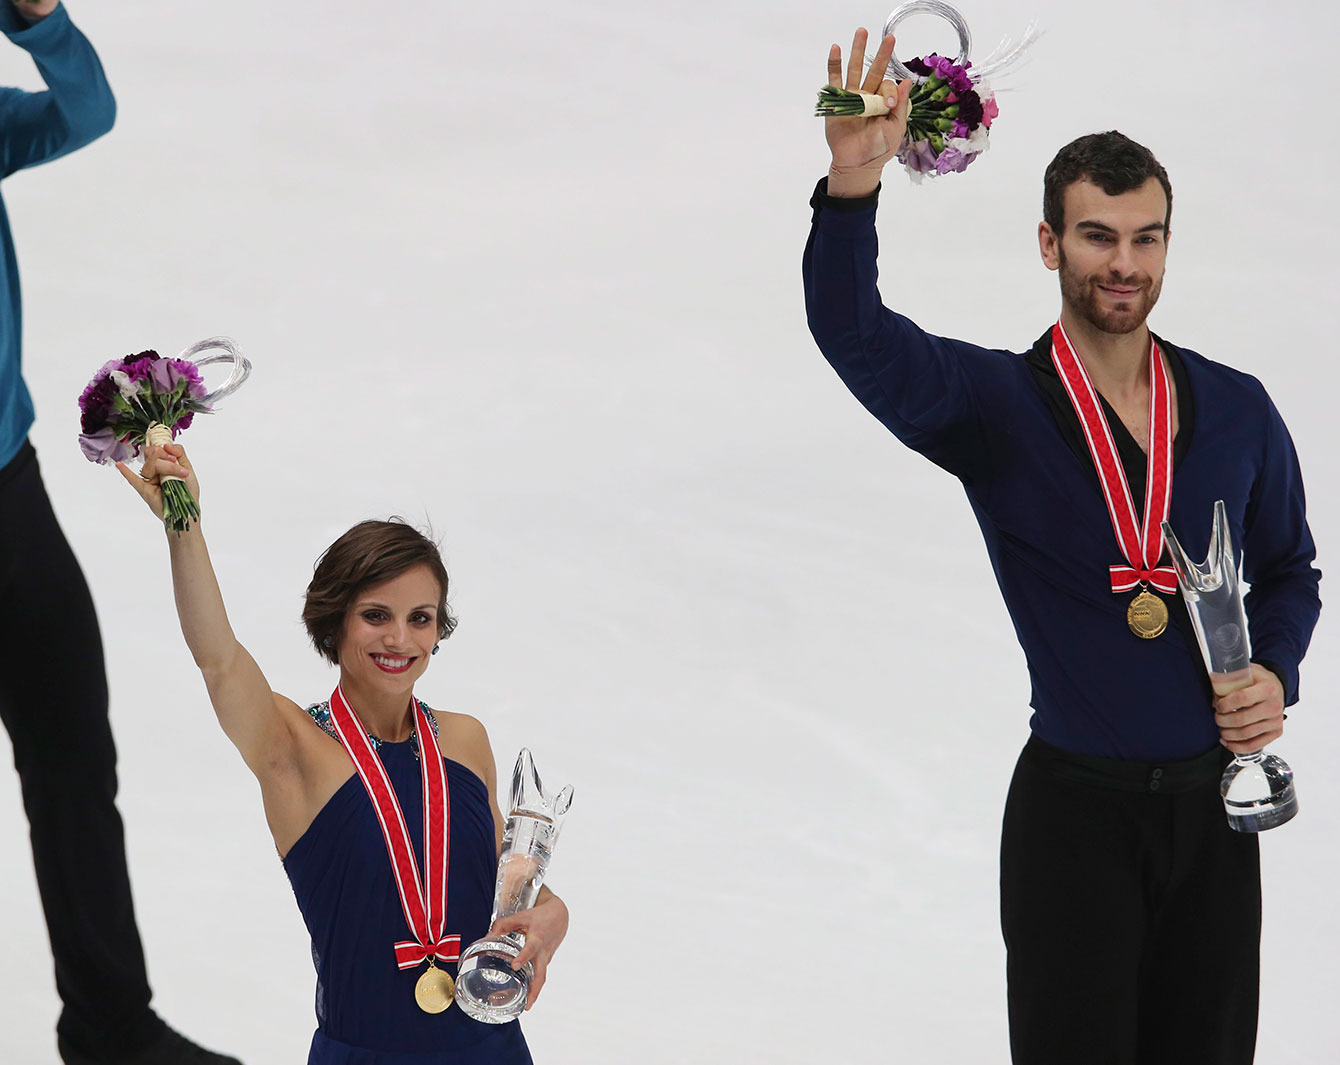 Meagan Duhamel and Eric Radford with their medals and first place awards at NHK Trophy (Grand Prix) on November 28, 2015. 